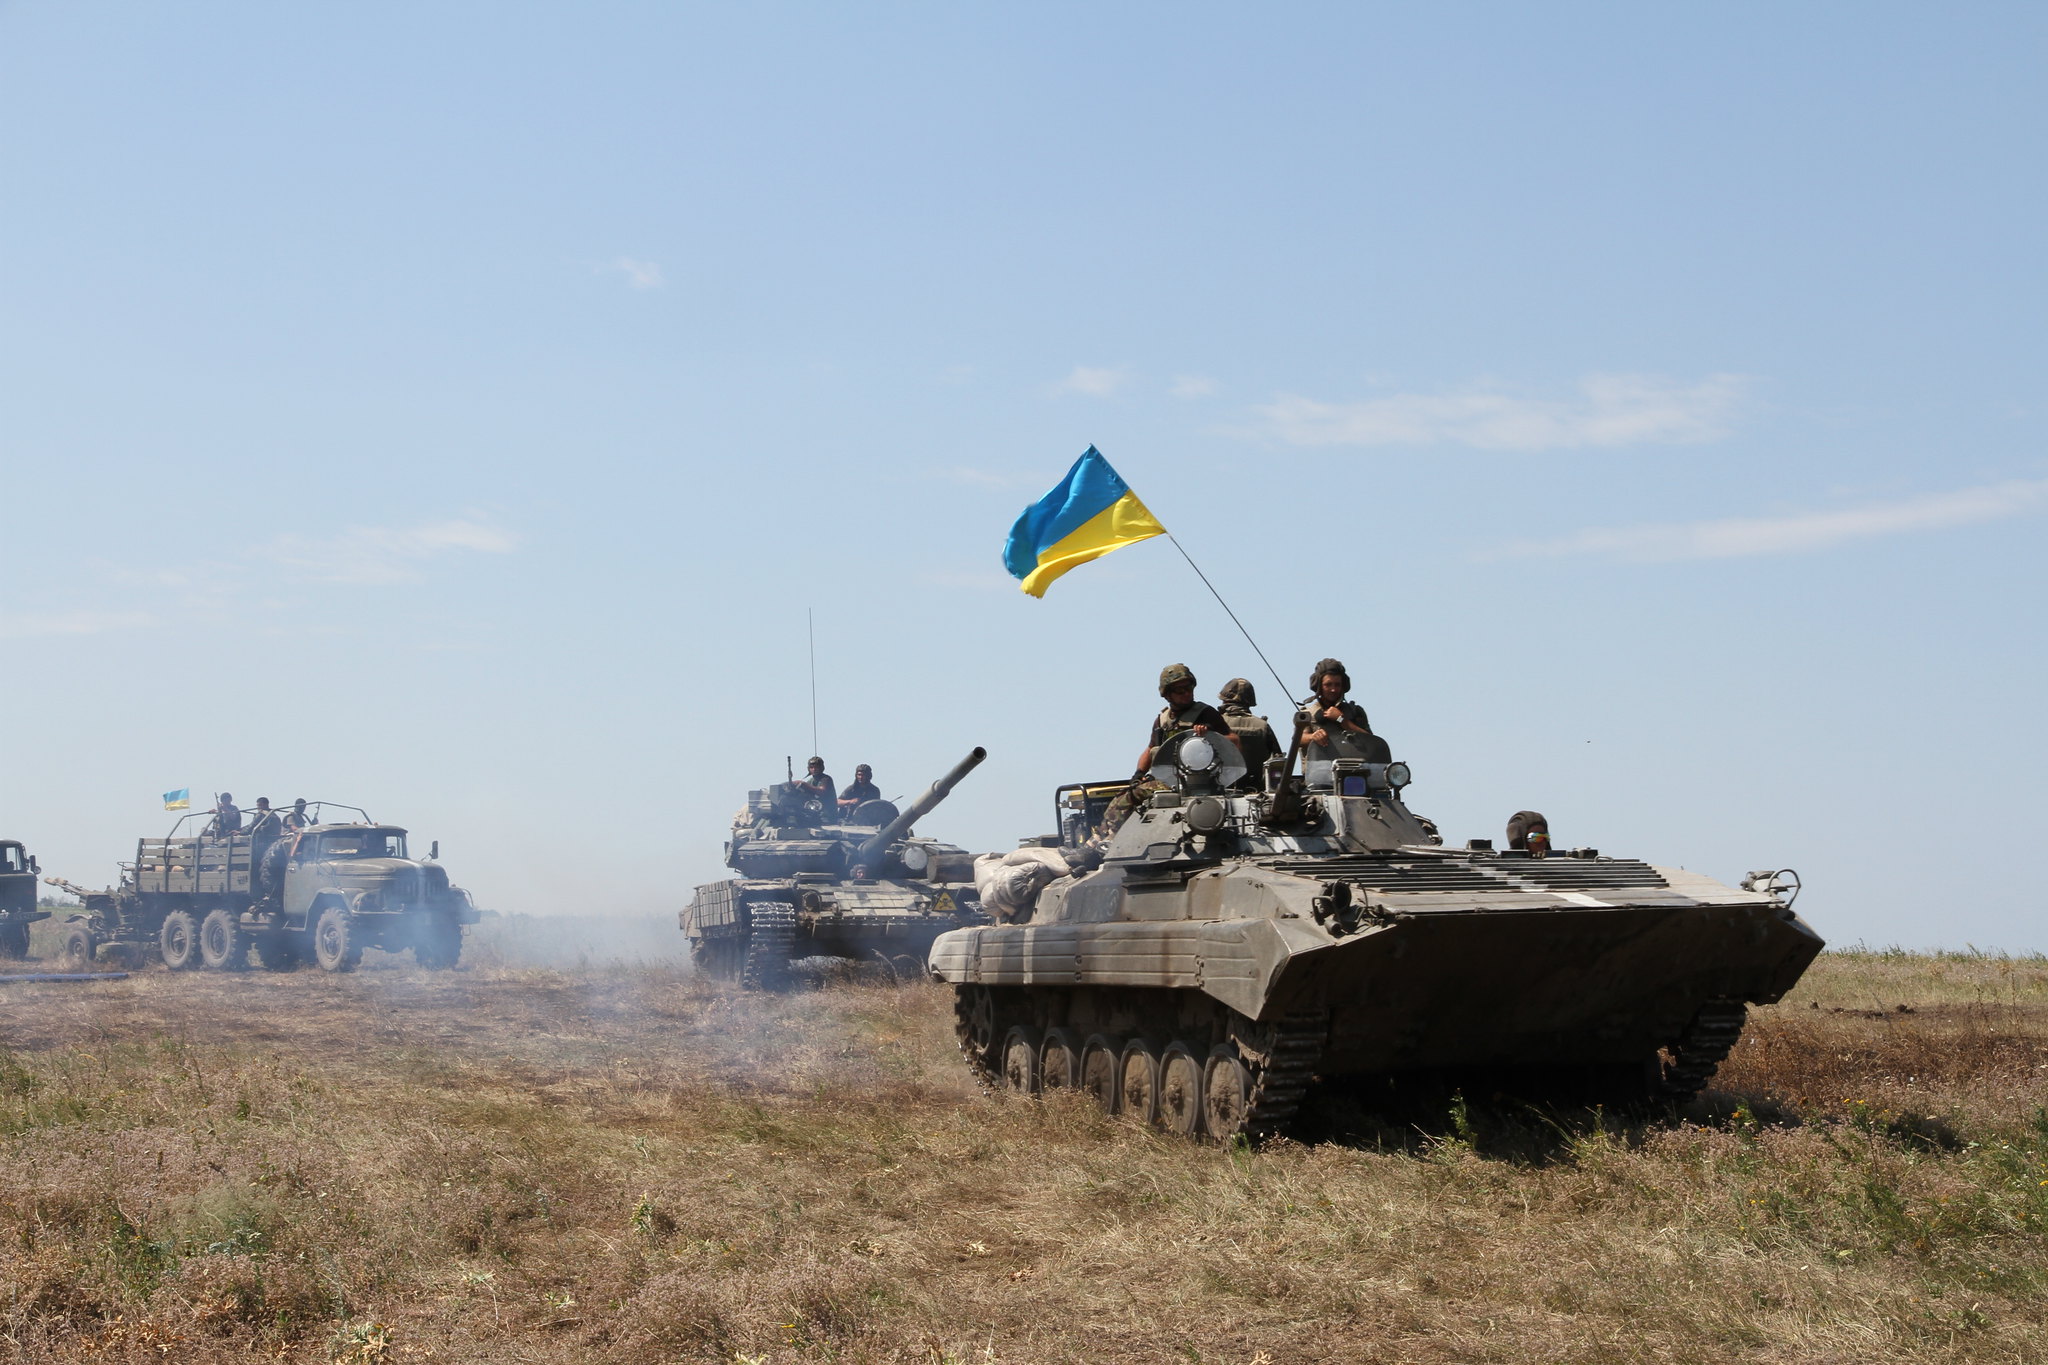 The claim that the Ukraine war benefits American business is not only repugnant but also false